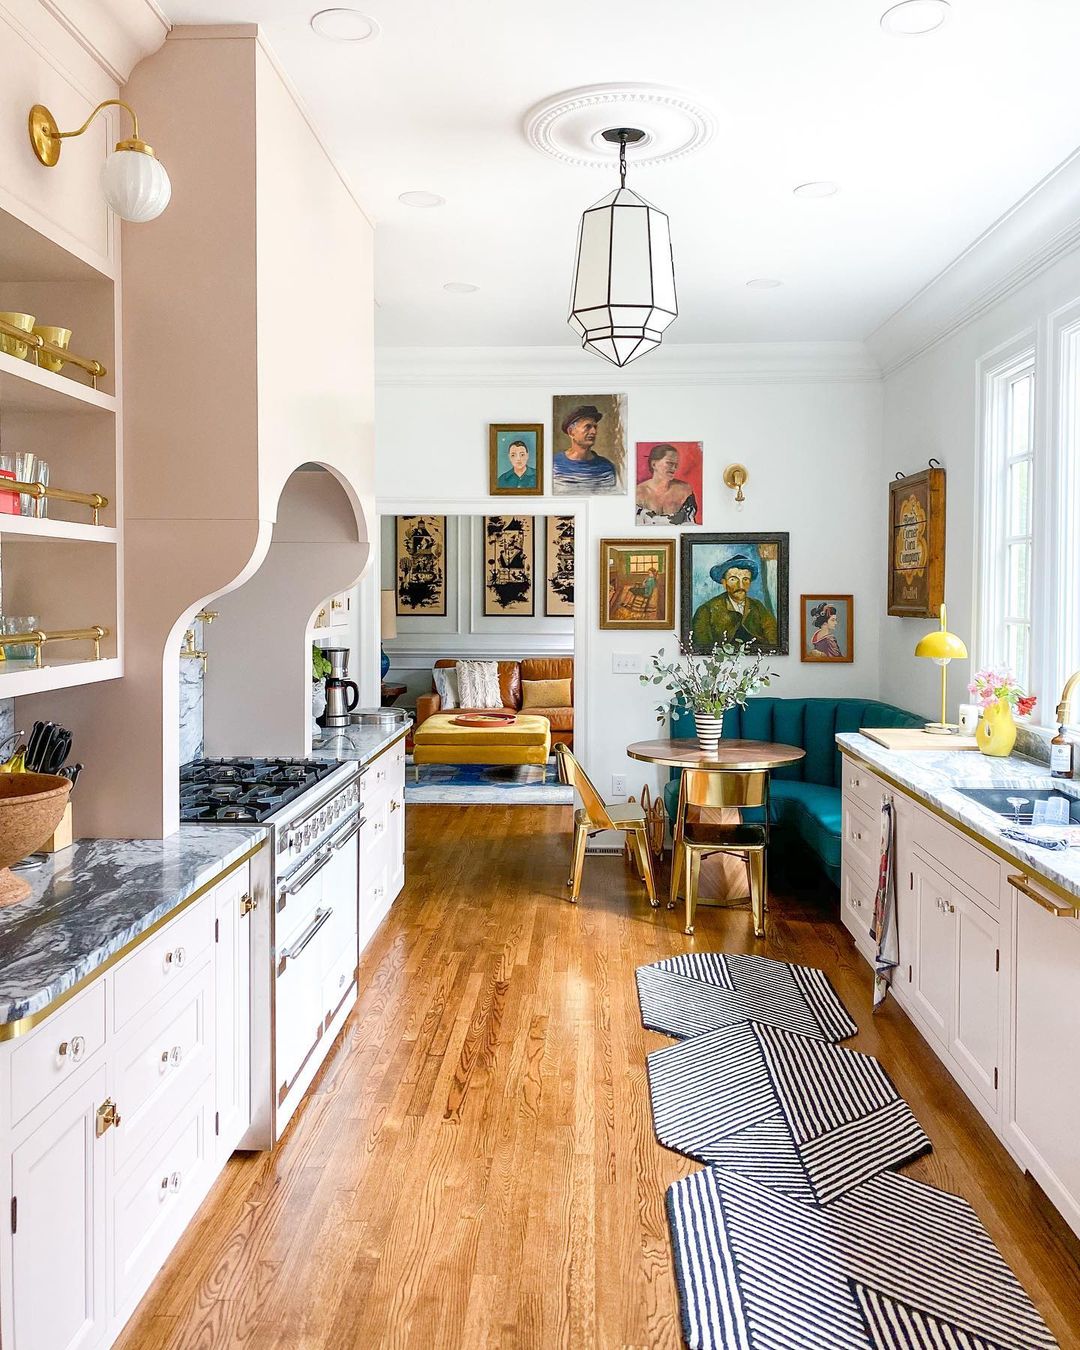 Eclectic galley kitchen design with fun colors and prints. Photo by Instagram User @home_ec_op